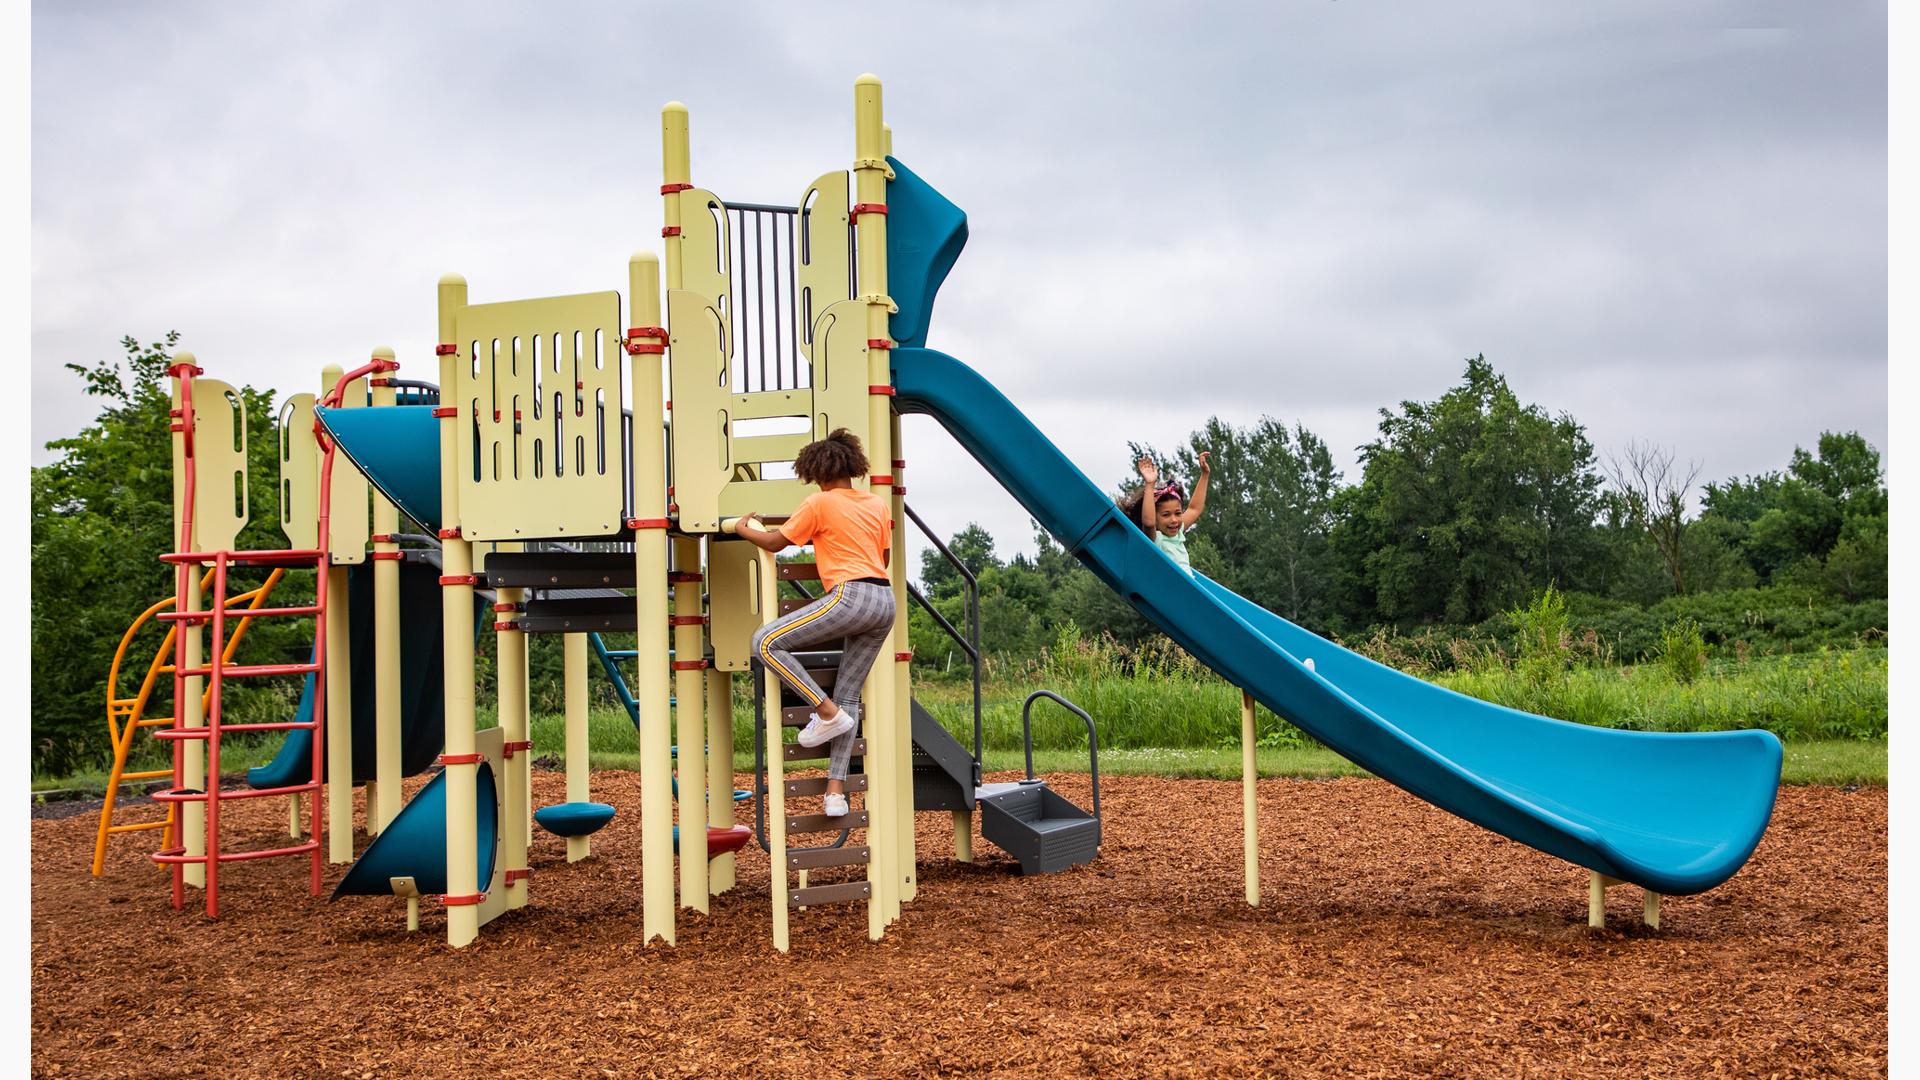 A girl puts her hands in the air as she slides down a blue Alpine Slide on a pale yellow PlayBooster playset.